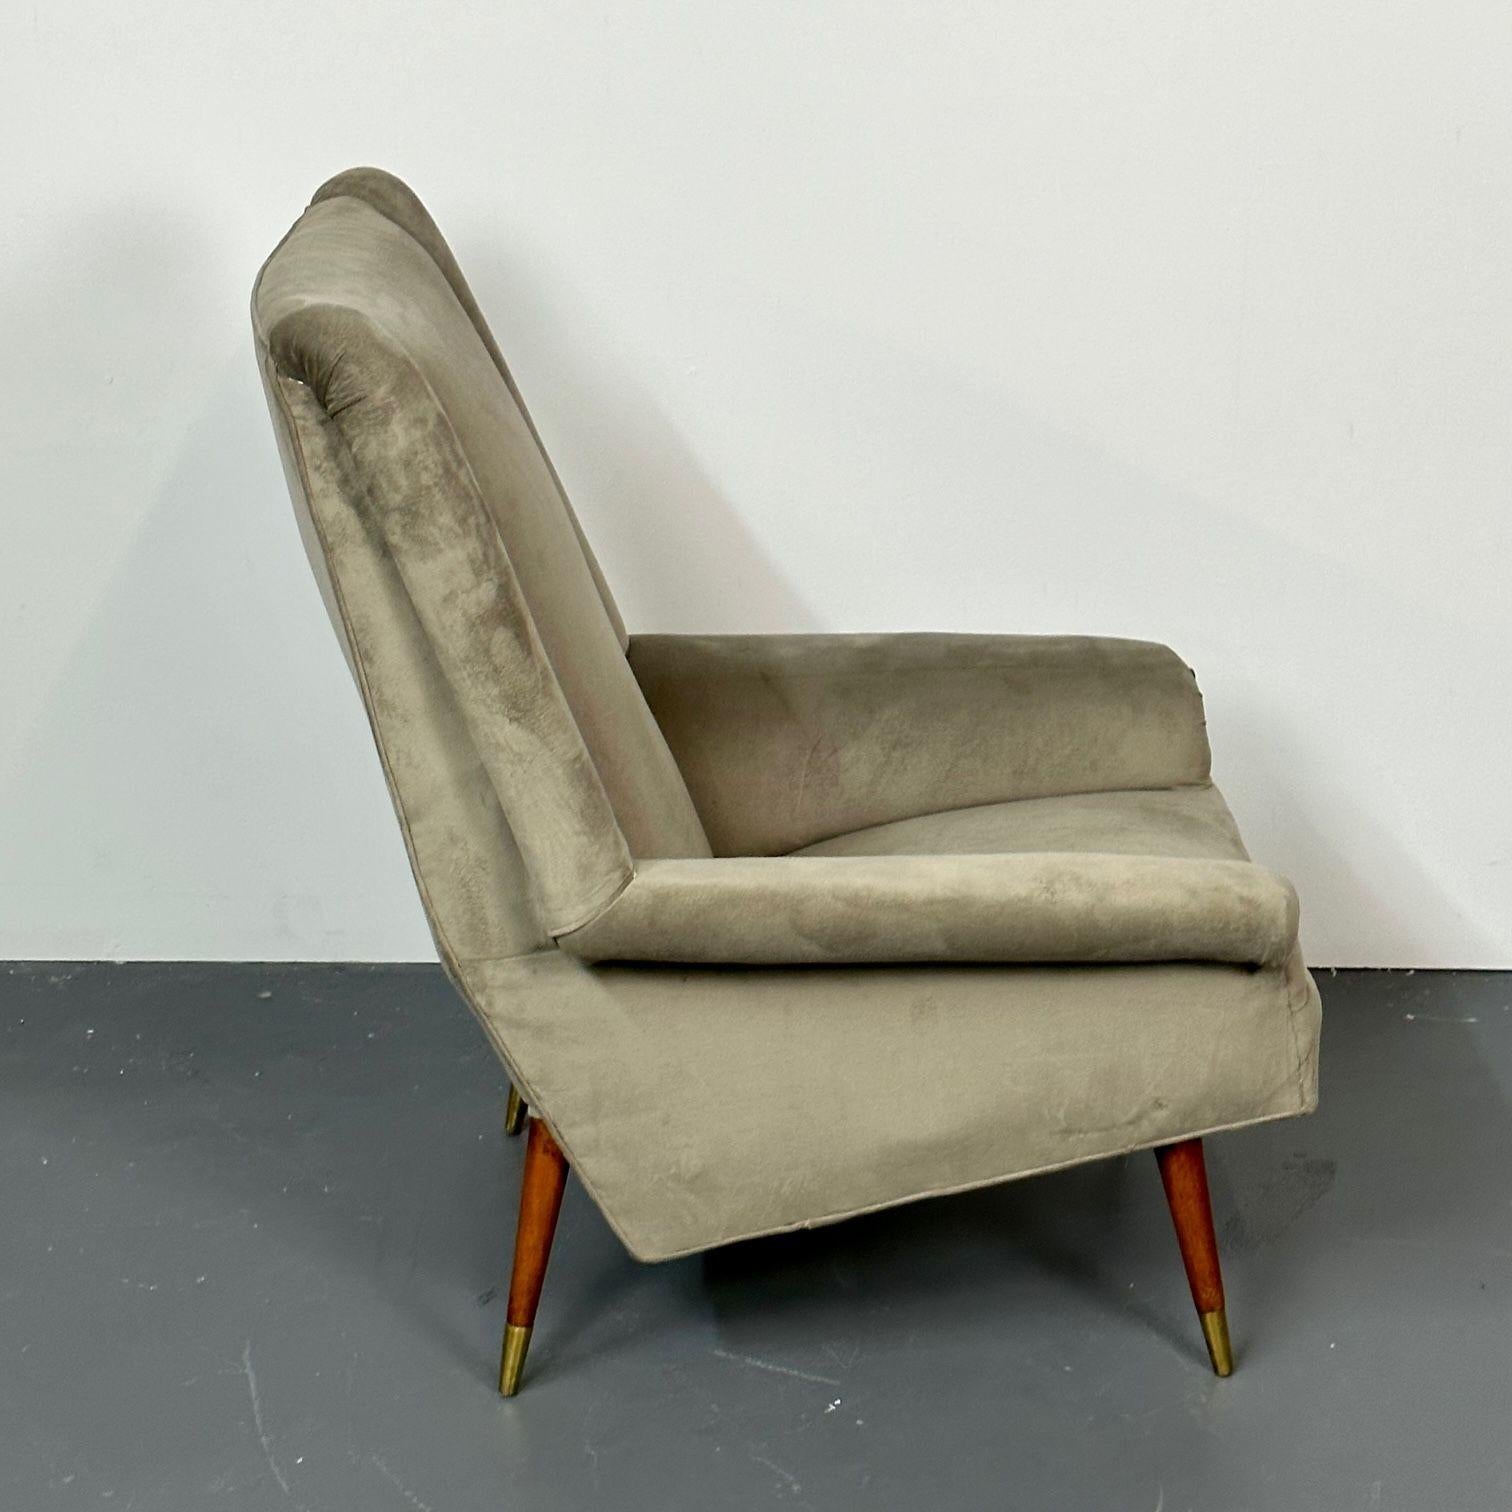 Gio Ponti Style, Mid-Century Modern, Wingback Chairs, Grey Velvet, Wood, 1950s For Sale 2